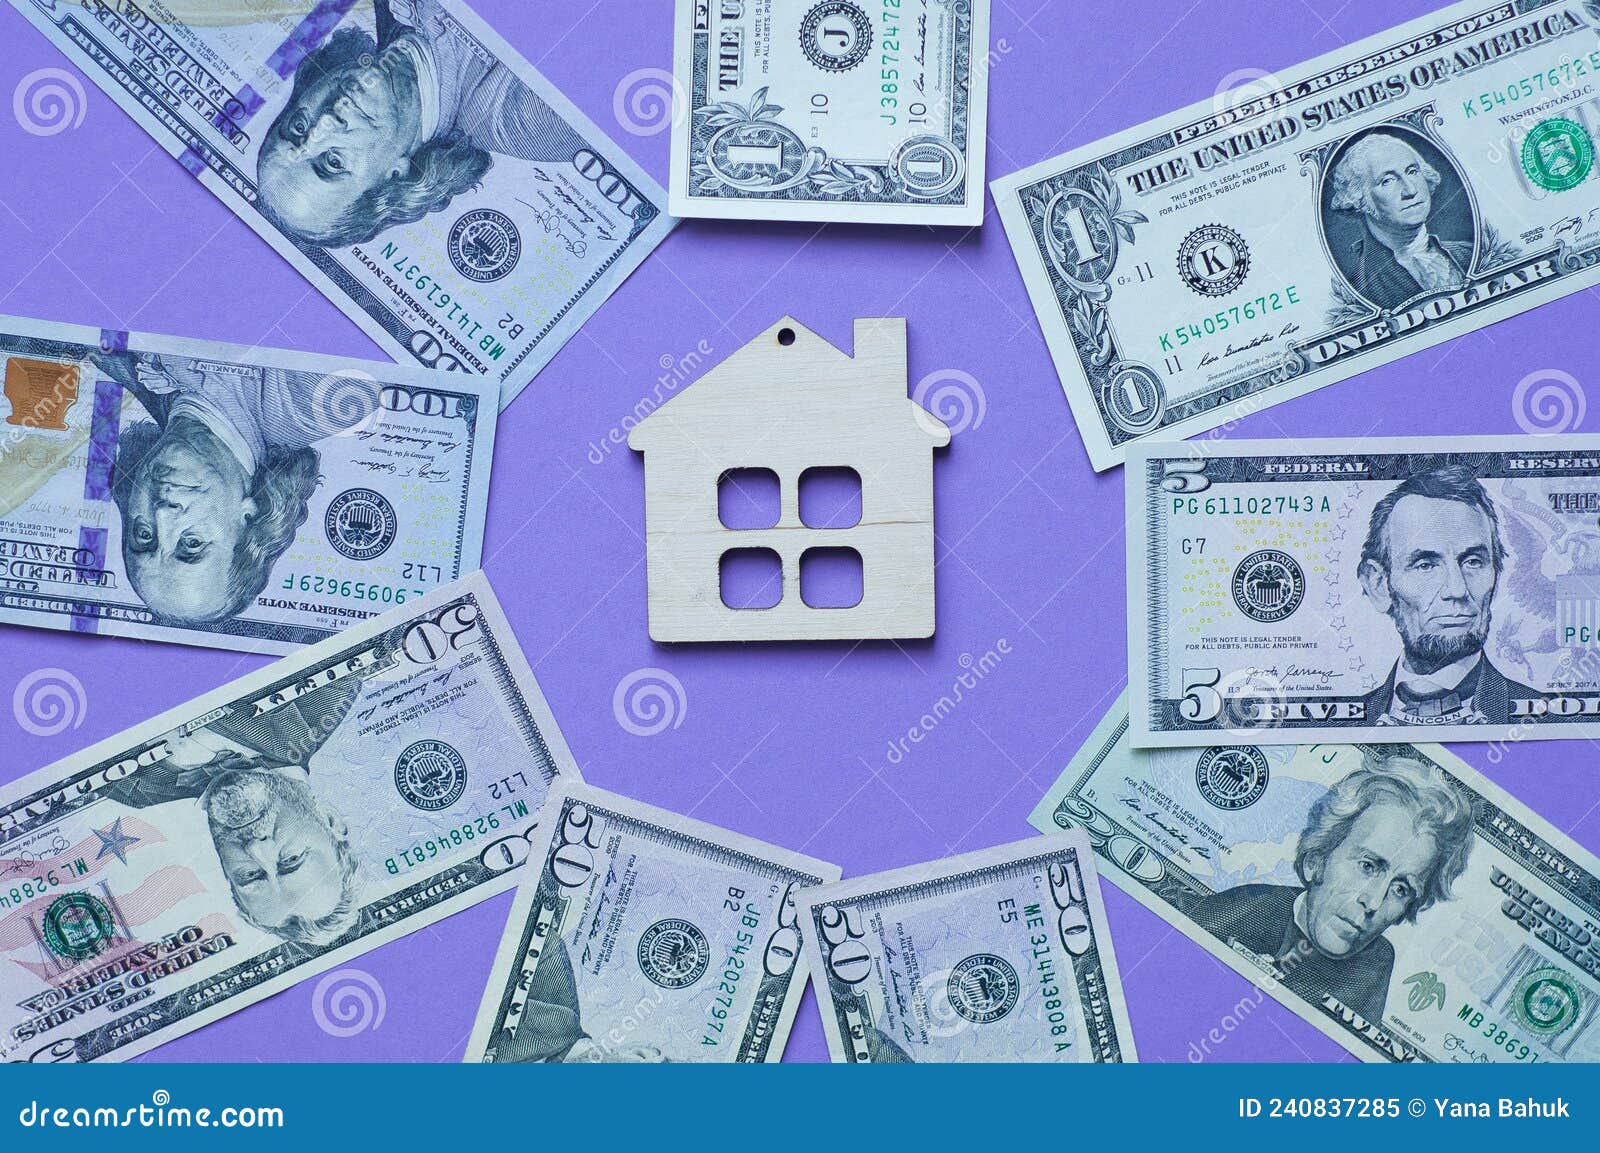 wooden small decorative house and paper money on purple background